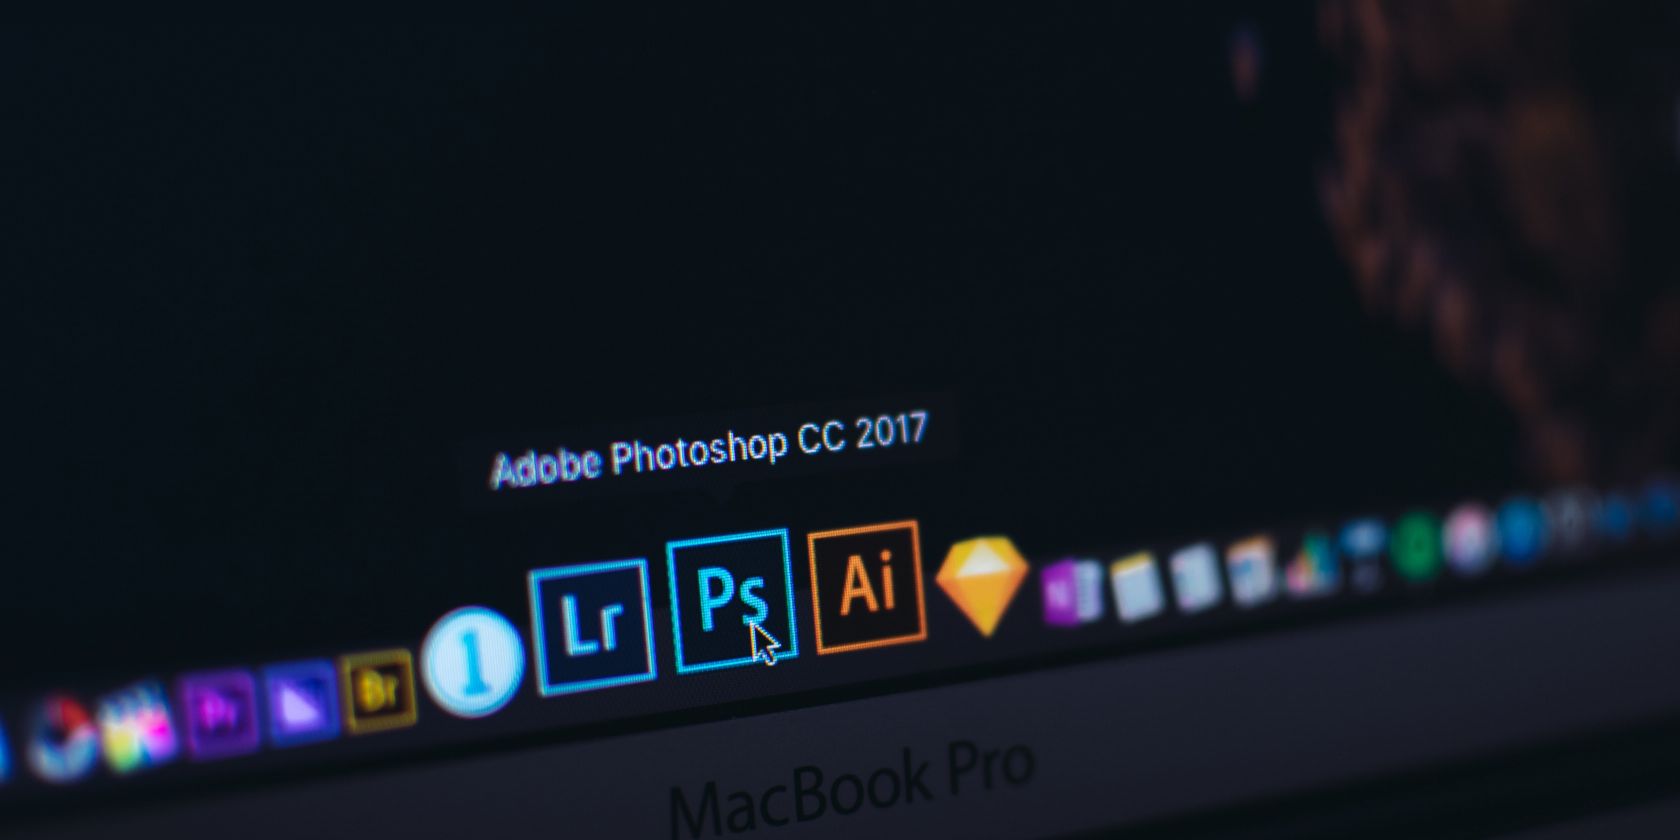 Yes, You Can Use Photoshop Free On The Web!